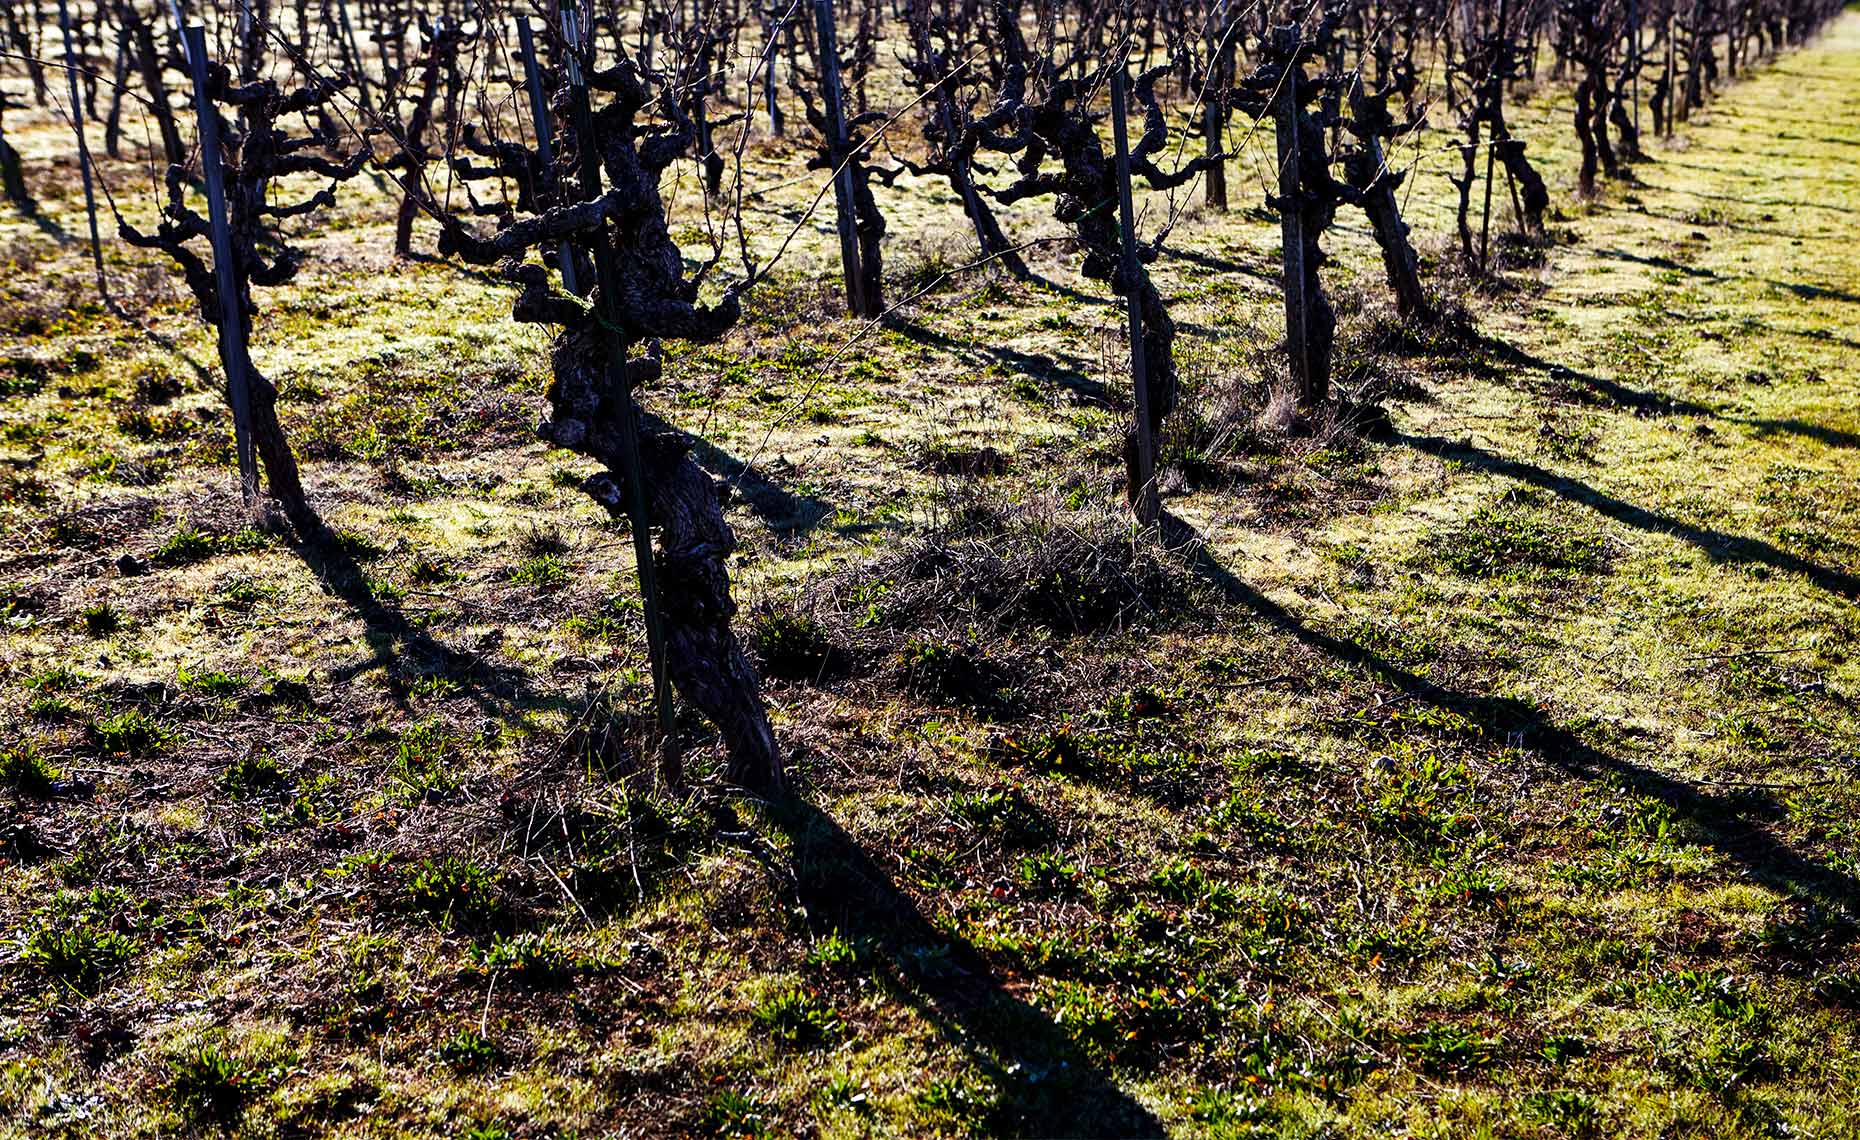 Beautiful repetitive shadows of dormant vines